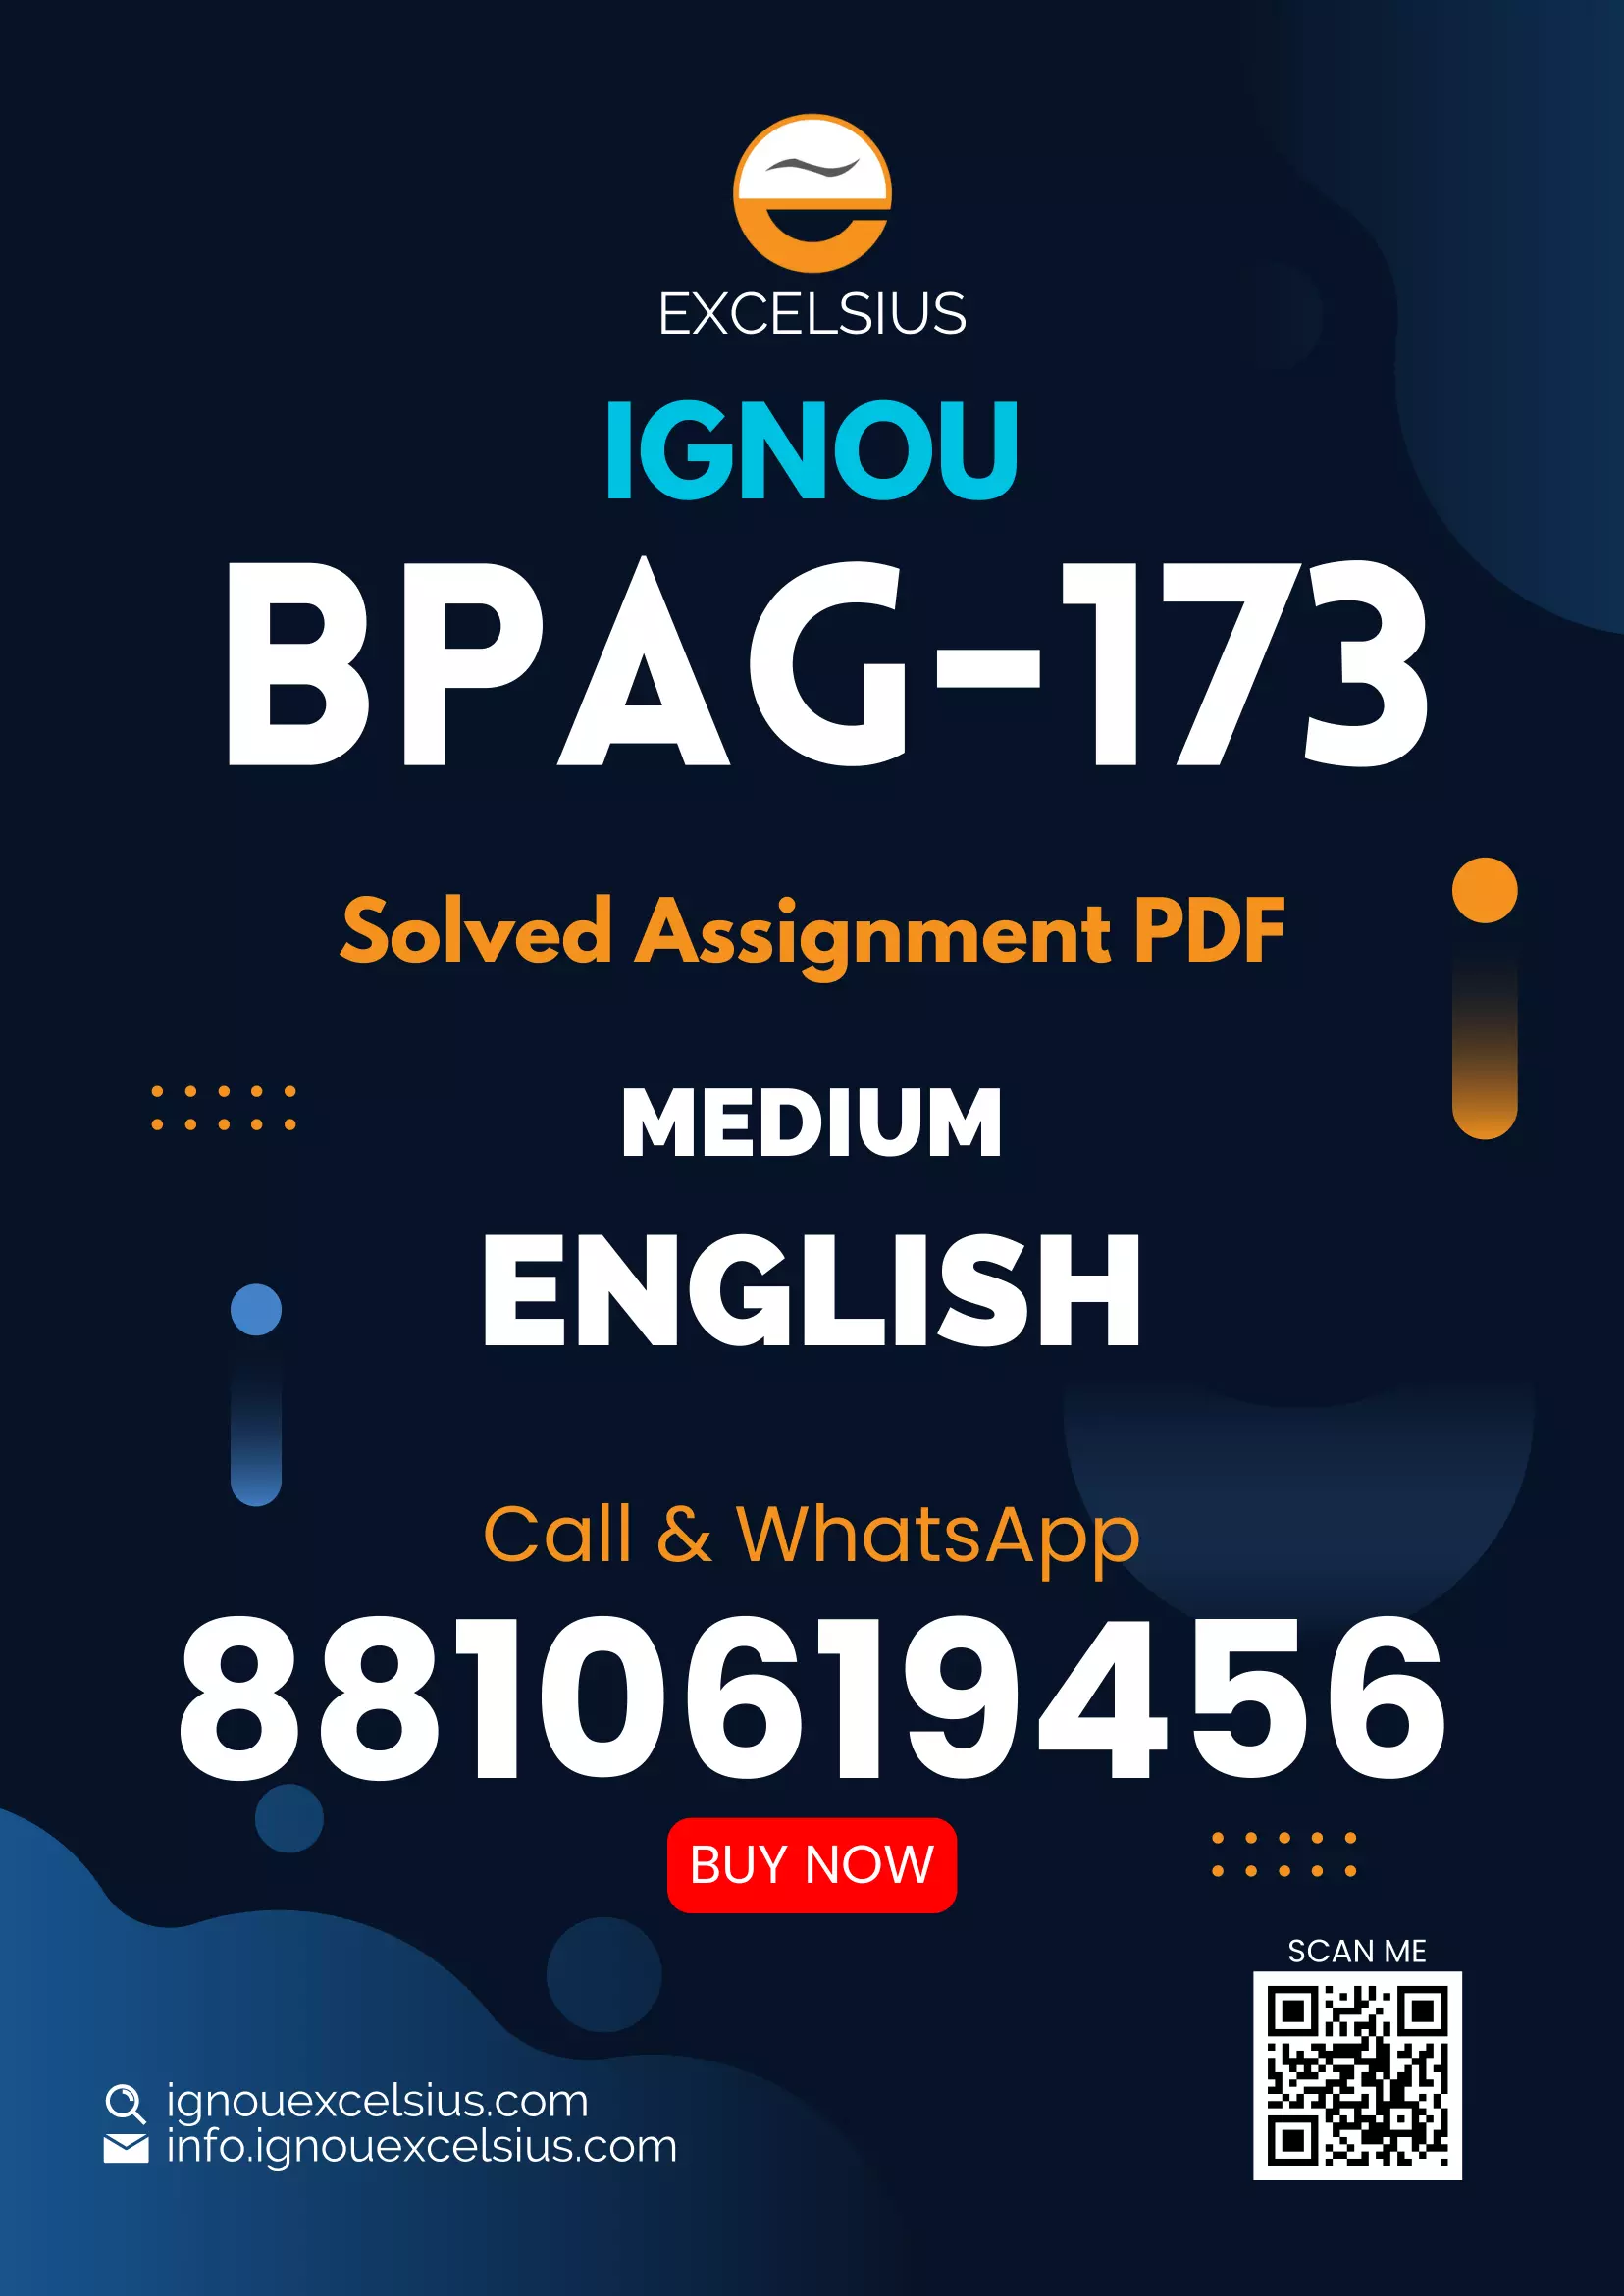 IGNOU BPAG-173 - E-Governance, Latest Solved Assignment-July 2022 – January 2023